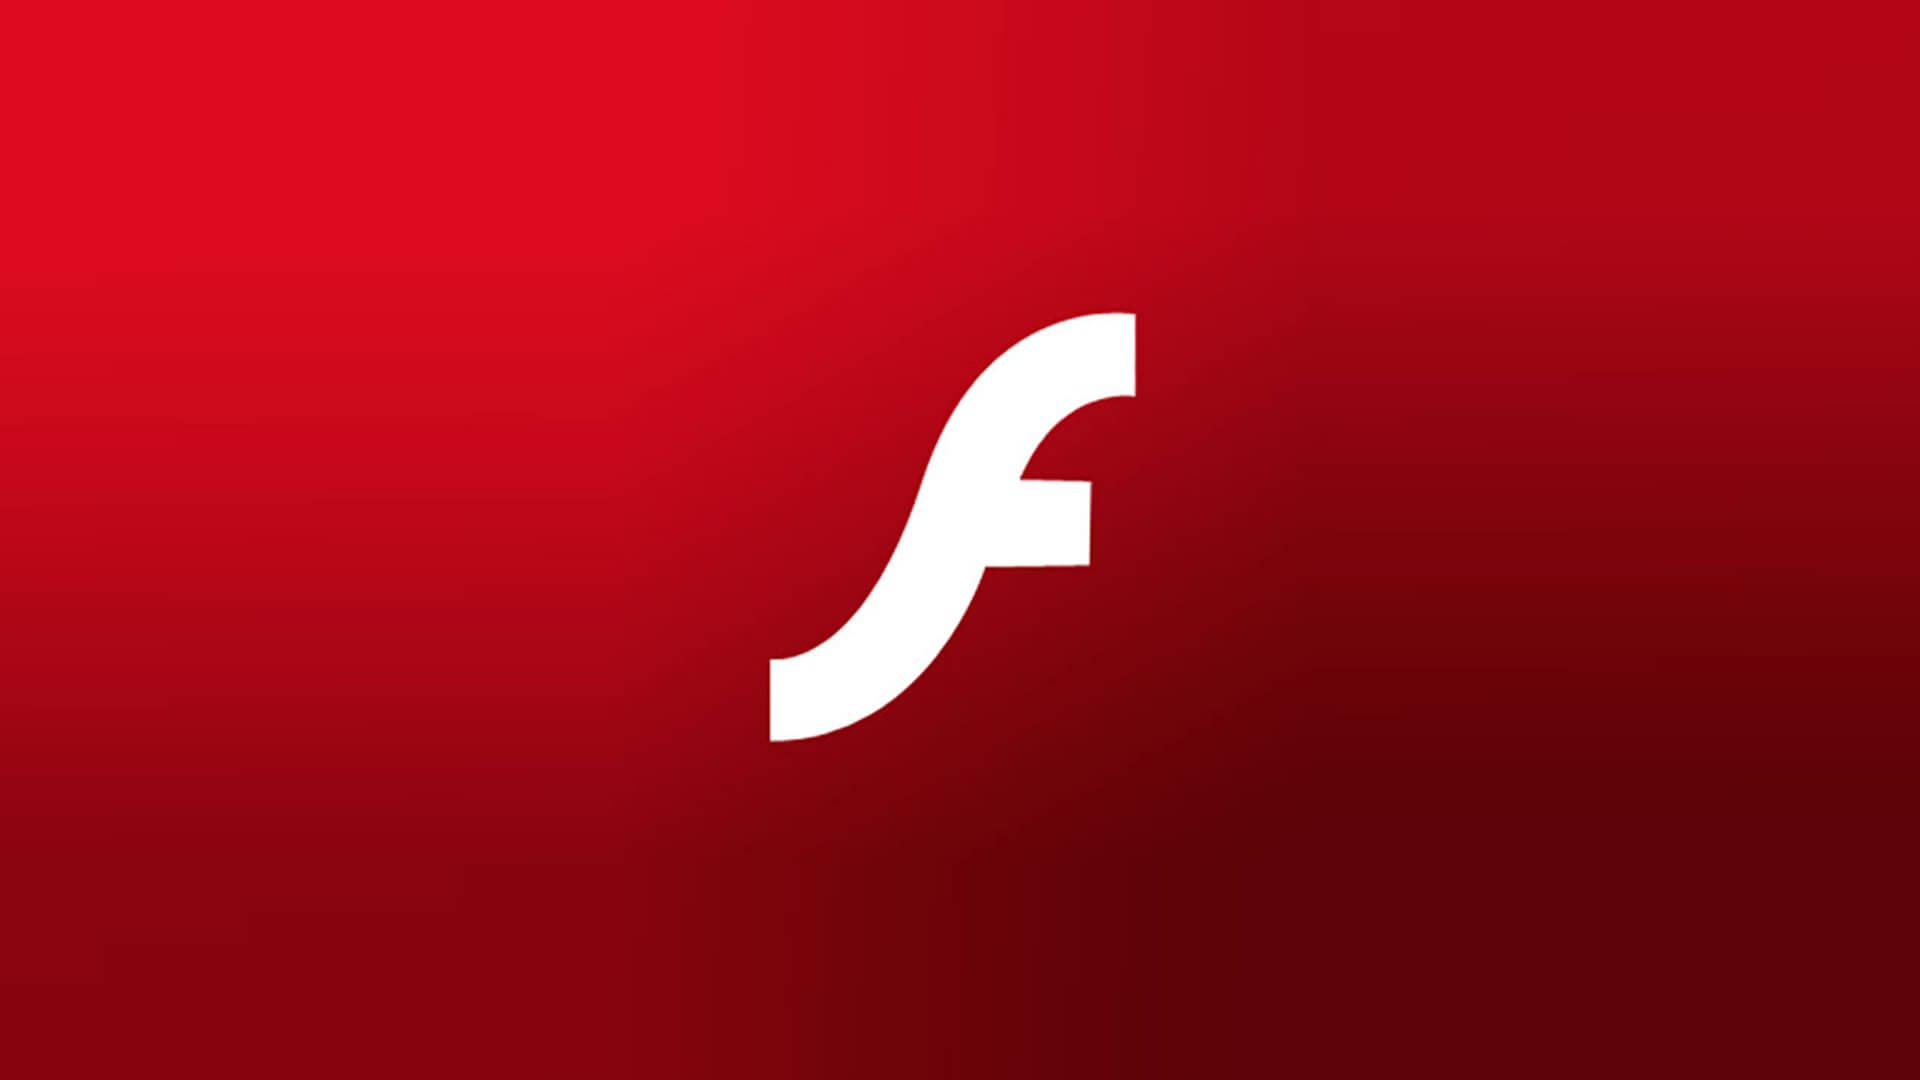 New Windows 10 manual update removes Flash from OS, prevents reinstallation